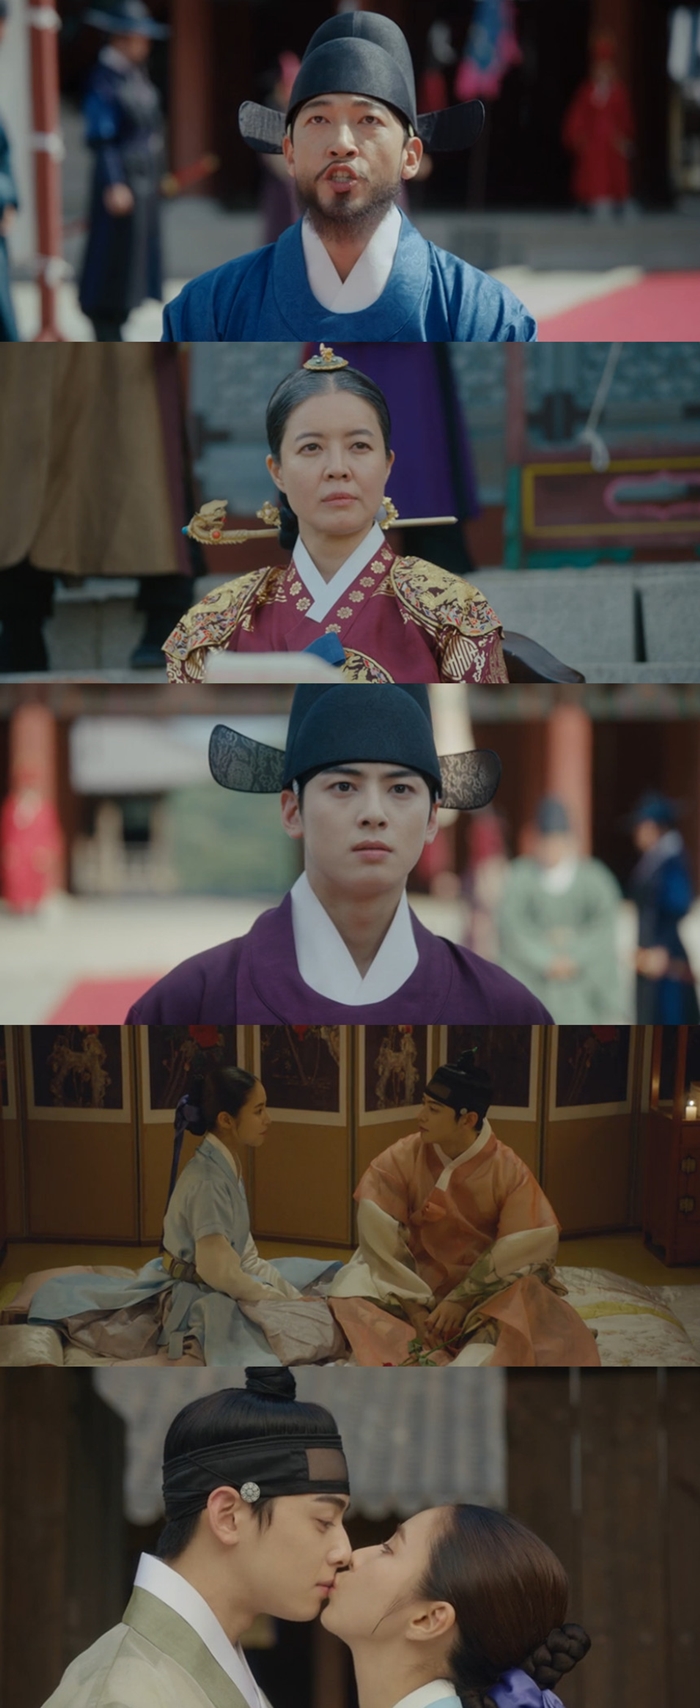 Shin Se-kyung and Jung Eun-woo, new recruit Rookie Historian Goo Hae-ryung, confirmed each others love and ended with Happy Endings.In the final episode of the MBC drama New Entrepreneur Rookie Historian Goe-ryung broadcasted on the 26th, Daewon Daegun Leerim (Cha Jung Eun-woo) confirmed his love Rookie Historian Goo Hae-ryung and concluded a Happy Endings.On this day, Min Ik-pyeong (Choi Deok-moon) planned to eliminate Lee Rim, who was digging into the dethronement of his wife, Lee Kyeom (Yoon Jong-hoon), 20 years ago.Min Ik-pyeong pressed the king (Kim Min-sang) and the crown prince Lee Jin (Park Ki-woong) by saying, Daewon Dae-gun should disappear from the world. The person who killed the king 20 years ago was Min Ik-pyeong.Min-pyeong said, Do not forget that I made a decision 20 years ago that you are here.The 20th anniversary banquet of the kings accession will be held and Rookie Historian Goo Hae-ryungs brother, Koo Jae-kyung (played by Kong Jeong-hwan), will go on to reveal the truth 20 years ago.Koo Jae-kyung said, Everything, including the abolition and Seoraewon, was a frame of the peoples criticism. He said, Please lie and kill the people who have deceived the royal family.In the meantime, he did not believe in Catholicism and disclosed evidence that Seoraewon was a place to learn newspapers.In response, a preparation (Kim Yeo-jin) came forward, and Min Ik-pyeong said, How long should I pretend not to know the desire to raise Daewon to the king?Lee Lim came to the king and said, I am the son of Lee, Lee.He said, Is not it because I was guilty of killing my innocent brother and taking Wang Yu?The king told the officers to step down, but Rookie Historian Goo Hae-ryung sat next to Irim and said, I do not stop the temple, he said. If I kill the officer, another officer will sit down.Min Woo-won (Lee Ji-hoon) also made it clear that our officers can never step down.Min-pyeong insisted that the officers were killed, but Lee Jin said, True loyalties do not block the eyes and ears of the king.All those who hurt the king, the country, and the people are left, he said, rather than revealing the sins of the people. We must correct all of the things that happened at that time.After the truth was revealed, Irims choice was to live as a person Irim, not to bring Wang Yu back; Lee Jin was Wang Yu as scheduled.Irim confirmed his love with Rookie Historian Goo Hae-ryung and Rookie Historian Goo Hae-ryung concluded a Happy Endings by continuing his work as Ada Lovelace.Rookie Historian Goo Hae-ryung is a romance annals of the first problematic Ada Lovelace () Rookie Historian Goo Hae-ryung (Shin Se-kyung) of Joseon and the anti-war Motae Solo Prince Dowon Daegun Yirim (Jung Eun-woo)The prince, who is recorded for a moment, is about the meeting with Rookie Historian Goo Hae-ryung, a cadet officer who records every moment.The appearance of the weak prince Lee Rim, who is trapped in the palace, met Rookie Historian Goo Hae-ryung, a proud woman who showed an active attitude of life despite the constraints of society, revealing the truth of change and ending, and determining the direction of her life independently got a great response.Especially, the process of forming the pink air current of Jung Eun-woo and Shin Se-kyung, which had been hit by the early drama and drama every time, attracted attention to viewers.On the other hand, following the New Employee Rookie Historian Goo Hae-ryung, What a Day to Found starring Kim Hye-yoon and Roone will be broadcast from 8:55 pm on October 2.Photos  Capture MBC Broadcasting Screen